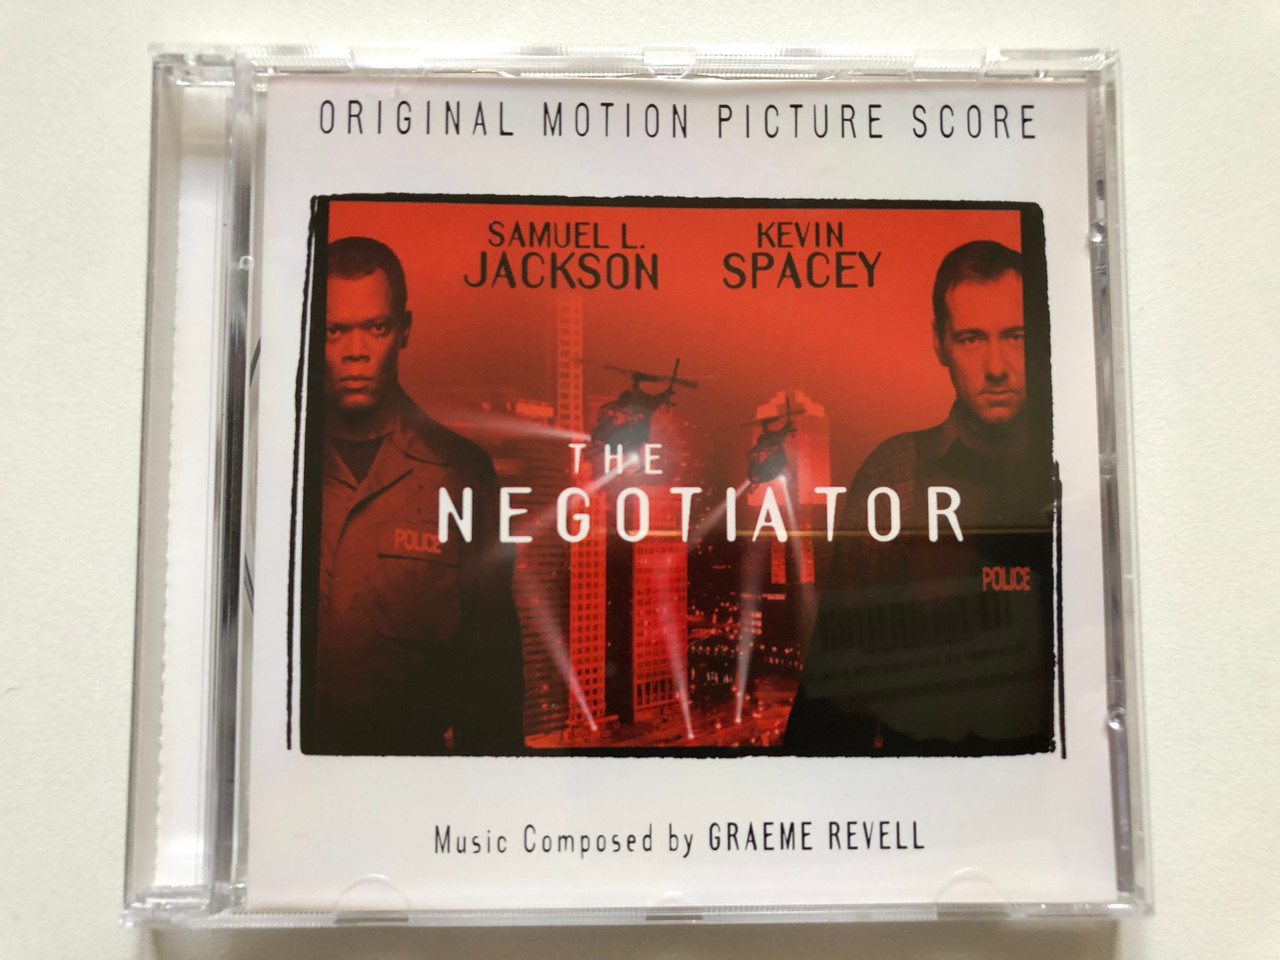 https://cdn10.bigcommerce.com/s-62bdpkt7pb/products/0/images/313284/Samuel_L._Jackson_Kevin_Spacey_The_Negotiator_Original_Motion_Picture_Score_-_Music_Composed_By_Graeme_Revell_Restless_Records_Audio_CD_1998_74321621762_1__24648.1700663275.1280.1280.JPG?c=2